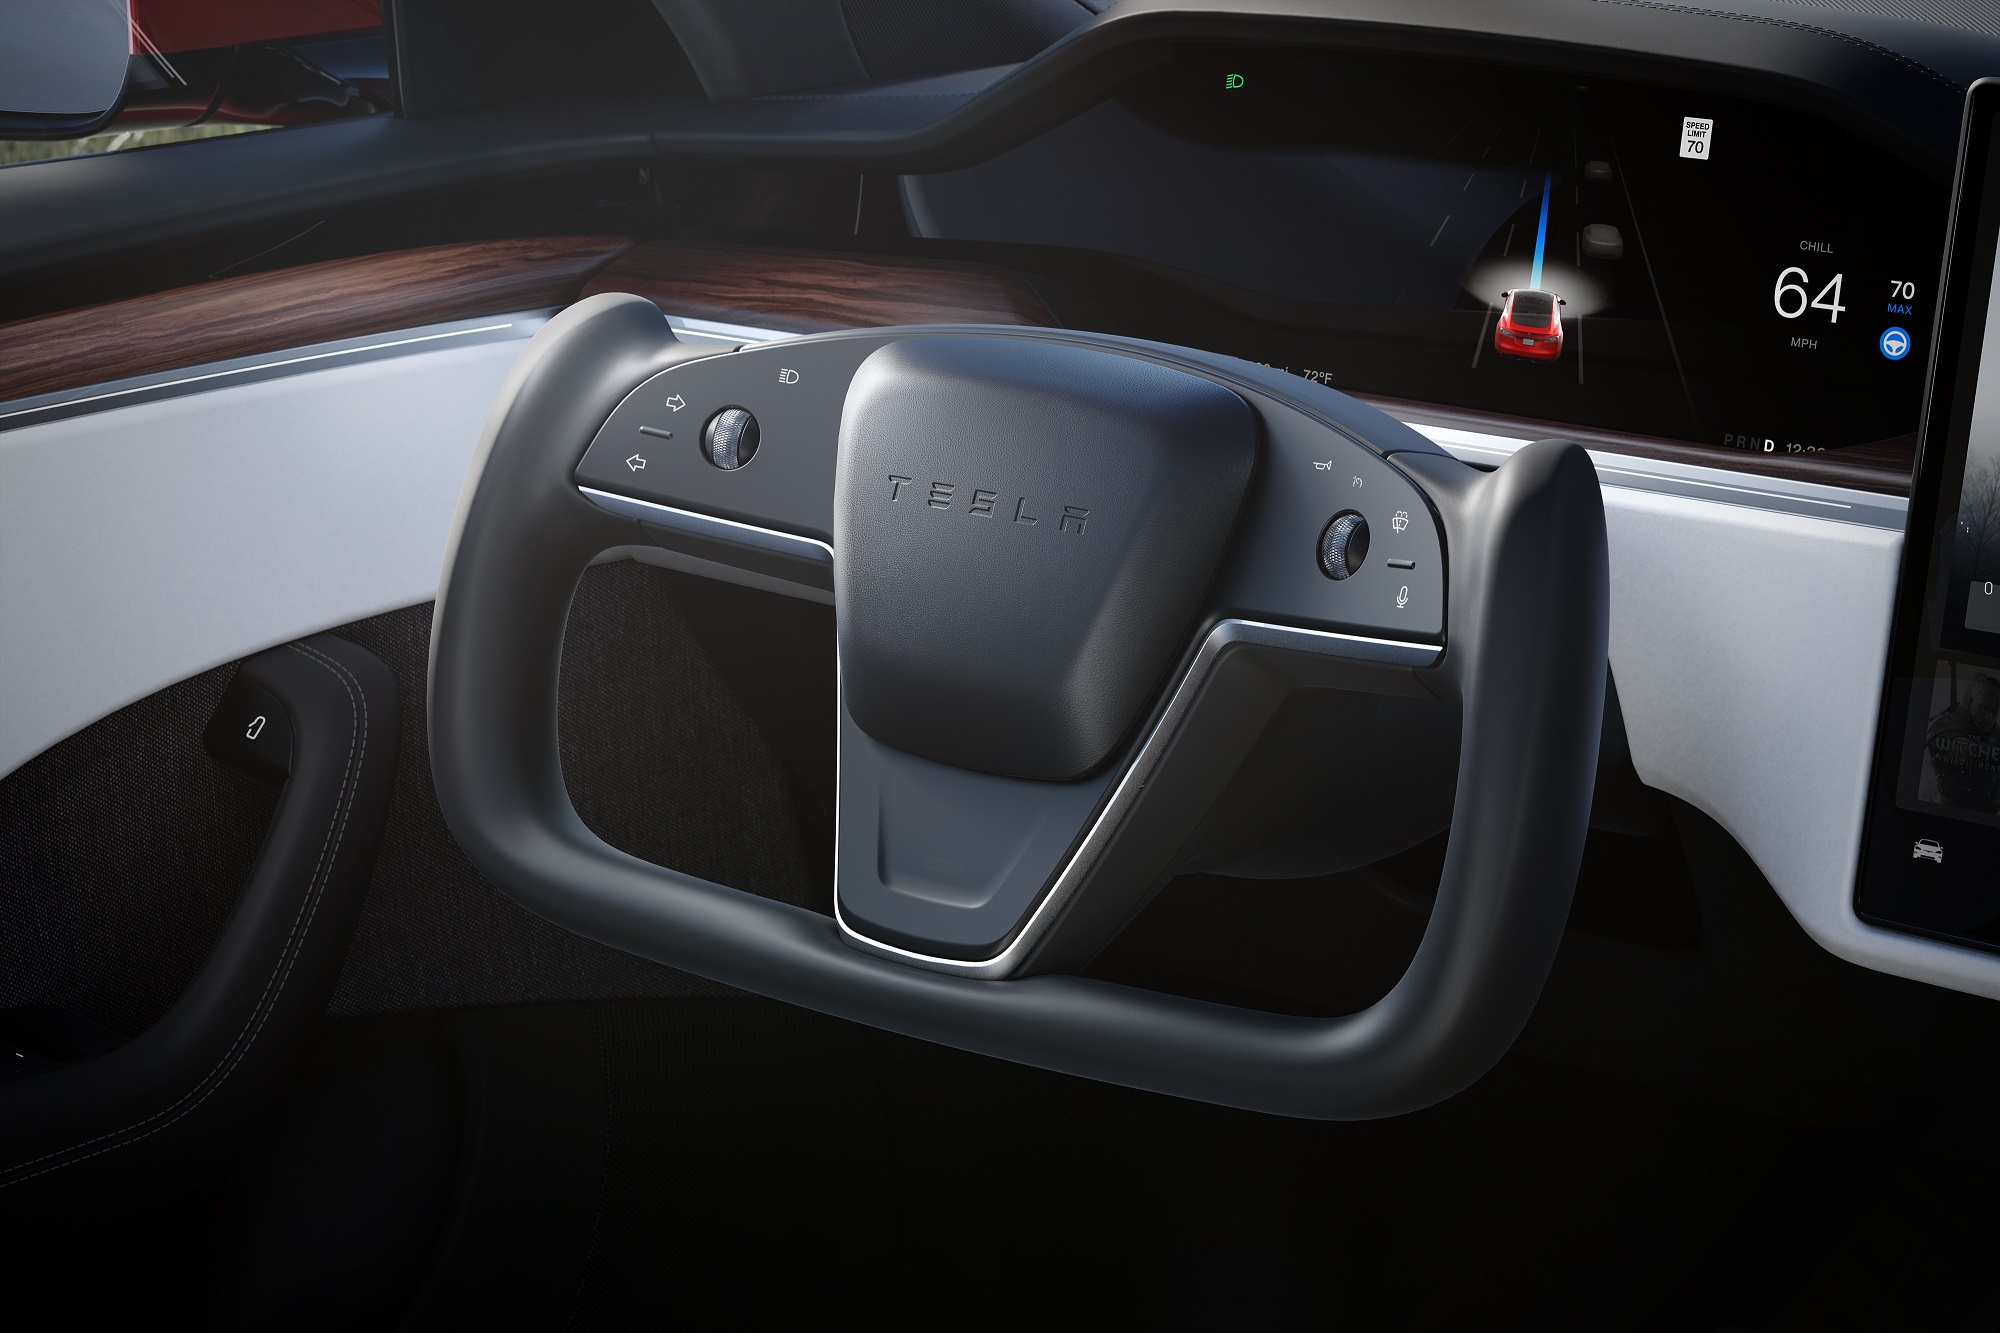 The Tesla steering wheel is yoke-style, which, along with the lack of CarPlay, is a problem for the Tesla.